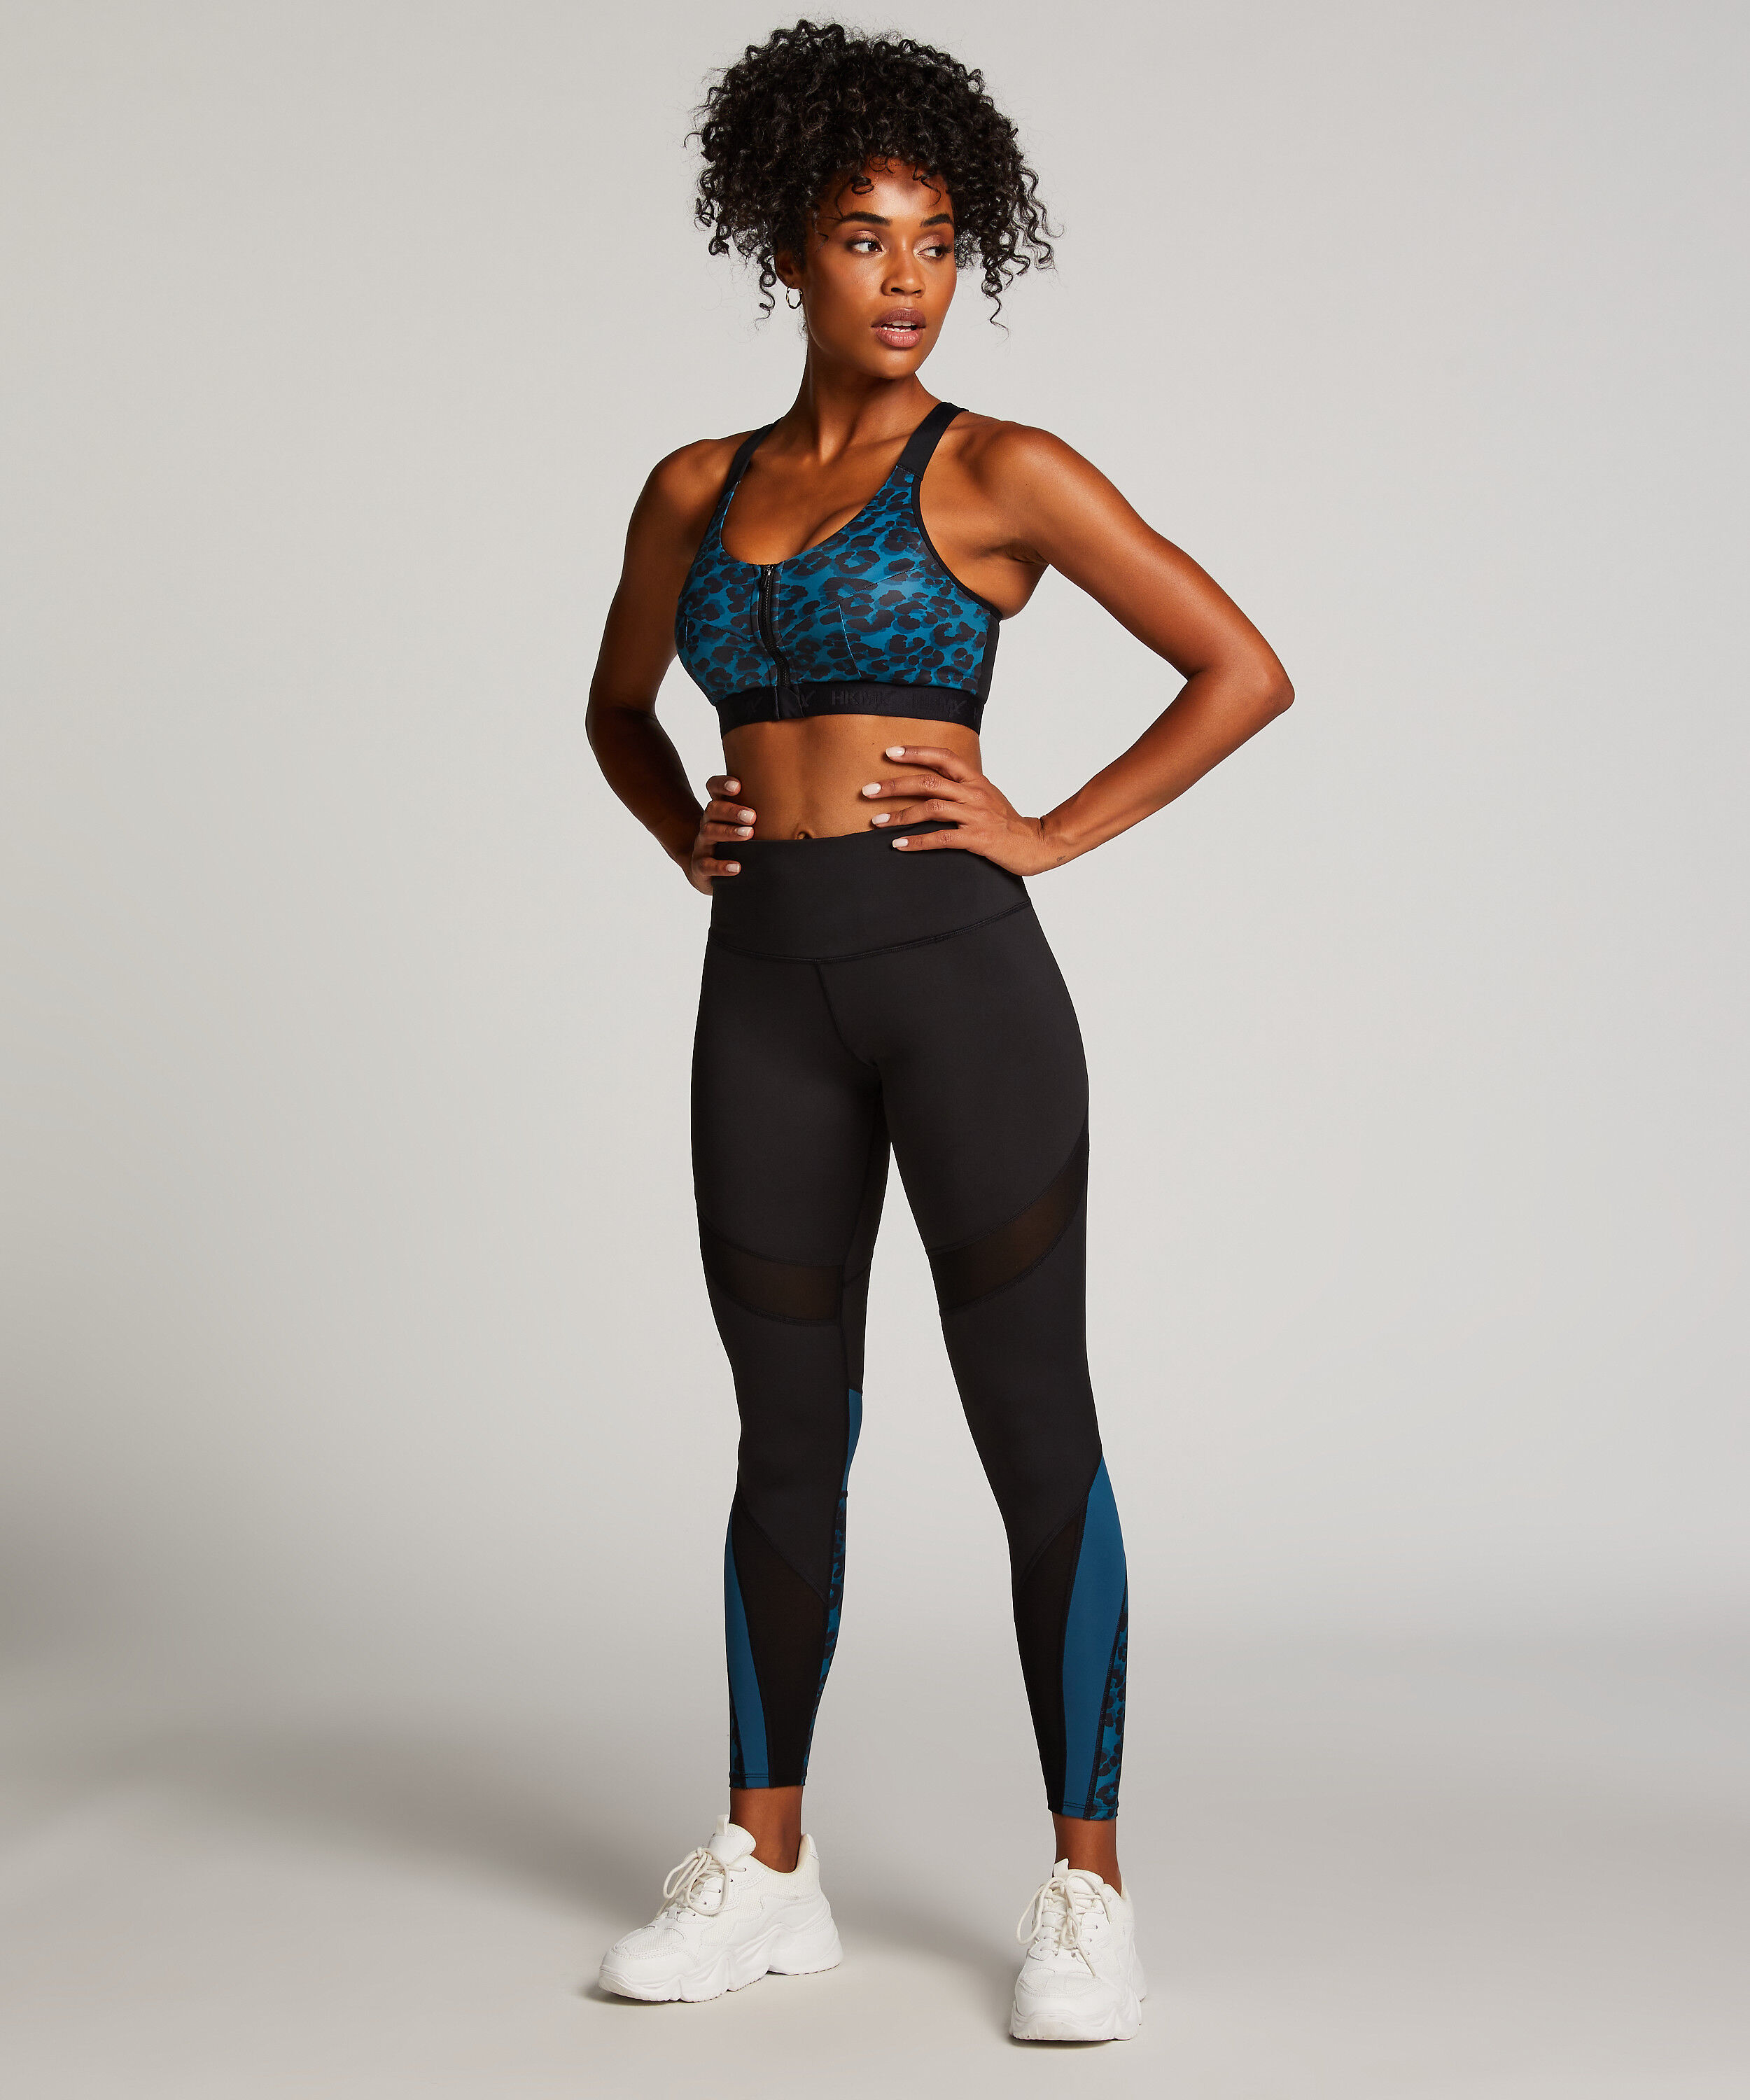 Fitness Leggings, Pants, Tops, Shoes & Zumba Clothes- Zumba Apparel